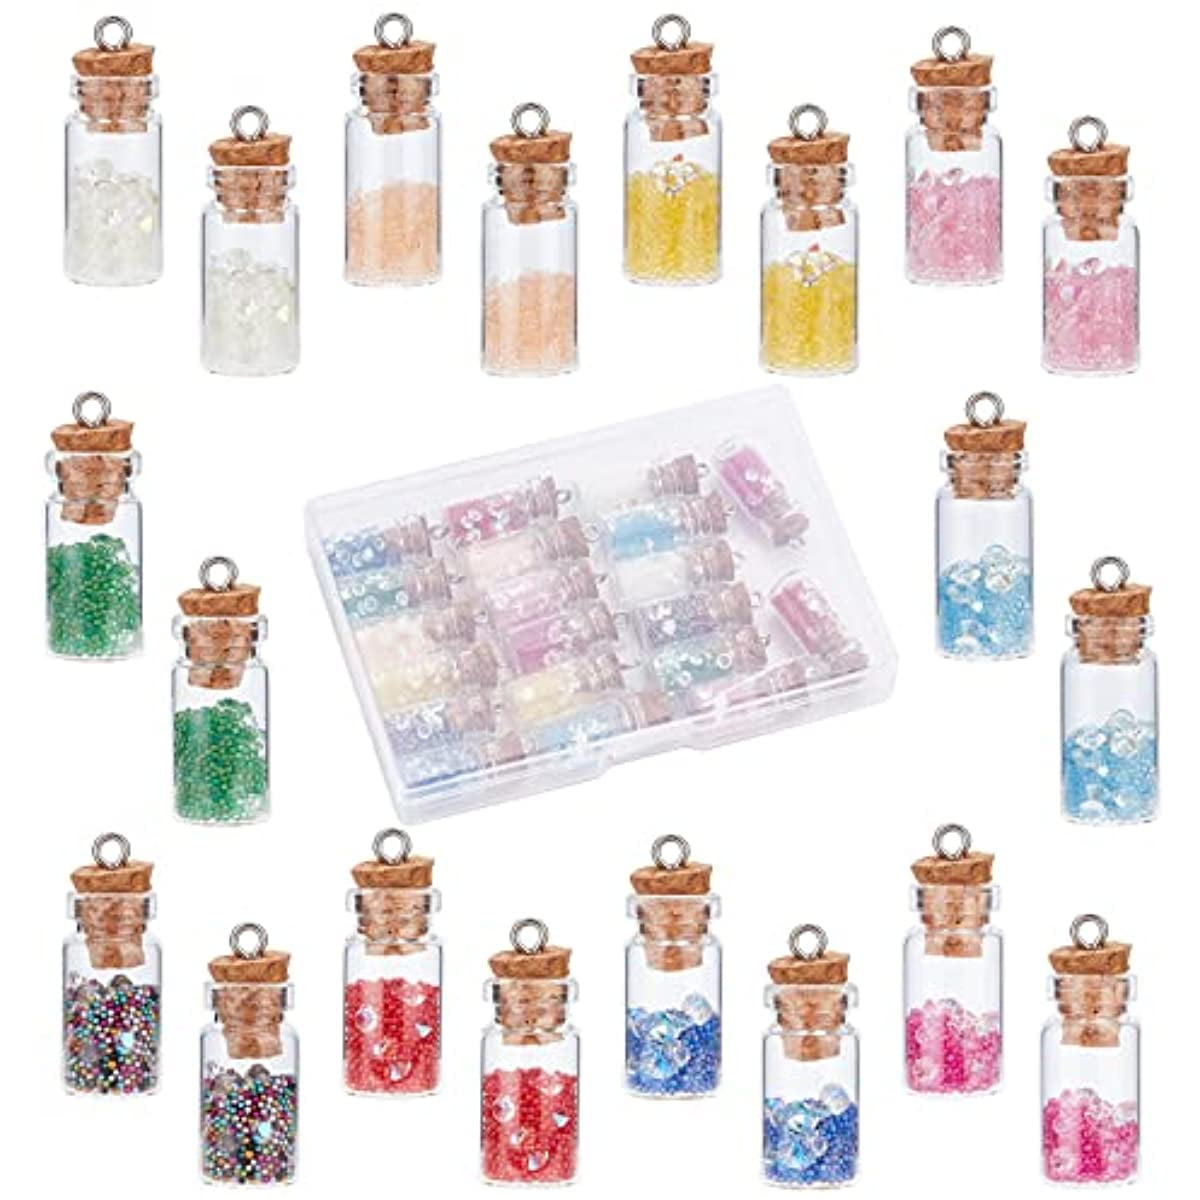 1Bag 20pcs Cube Shape Tiny Bottle Charms Clear Glass Mini Wish Bottles  Small Potion Bottles with Cork Stopper 20pcs Eye Pin Peg Bails for Home  Party Decor Crafts DIY Jewellery Making 